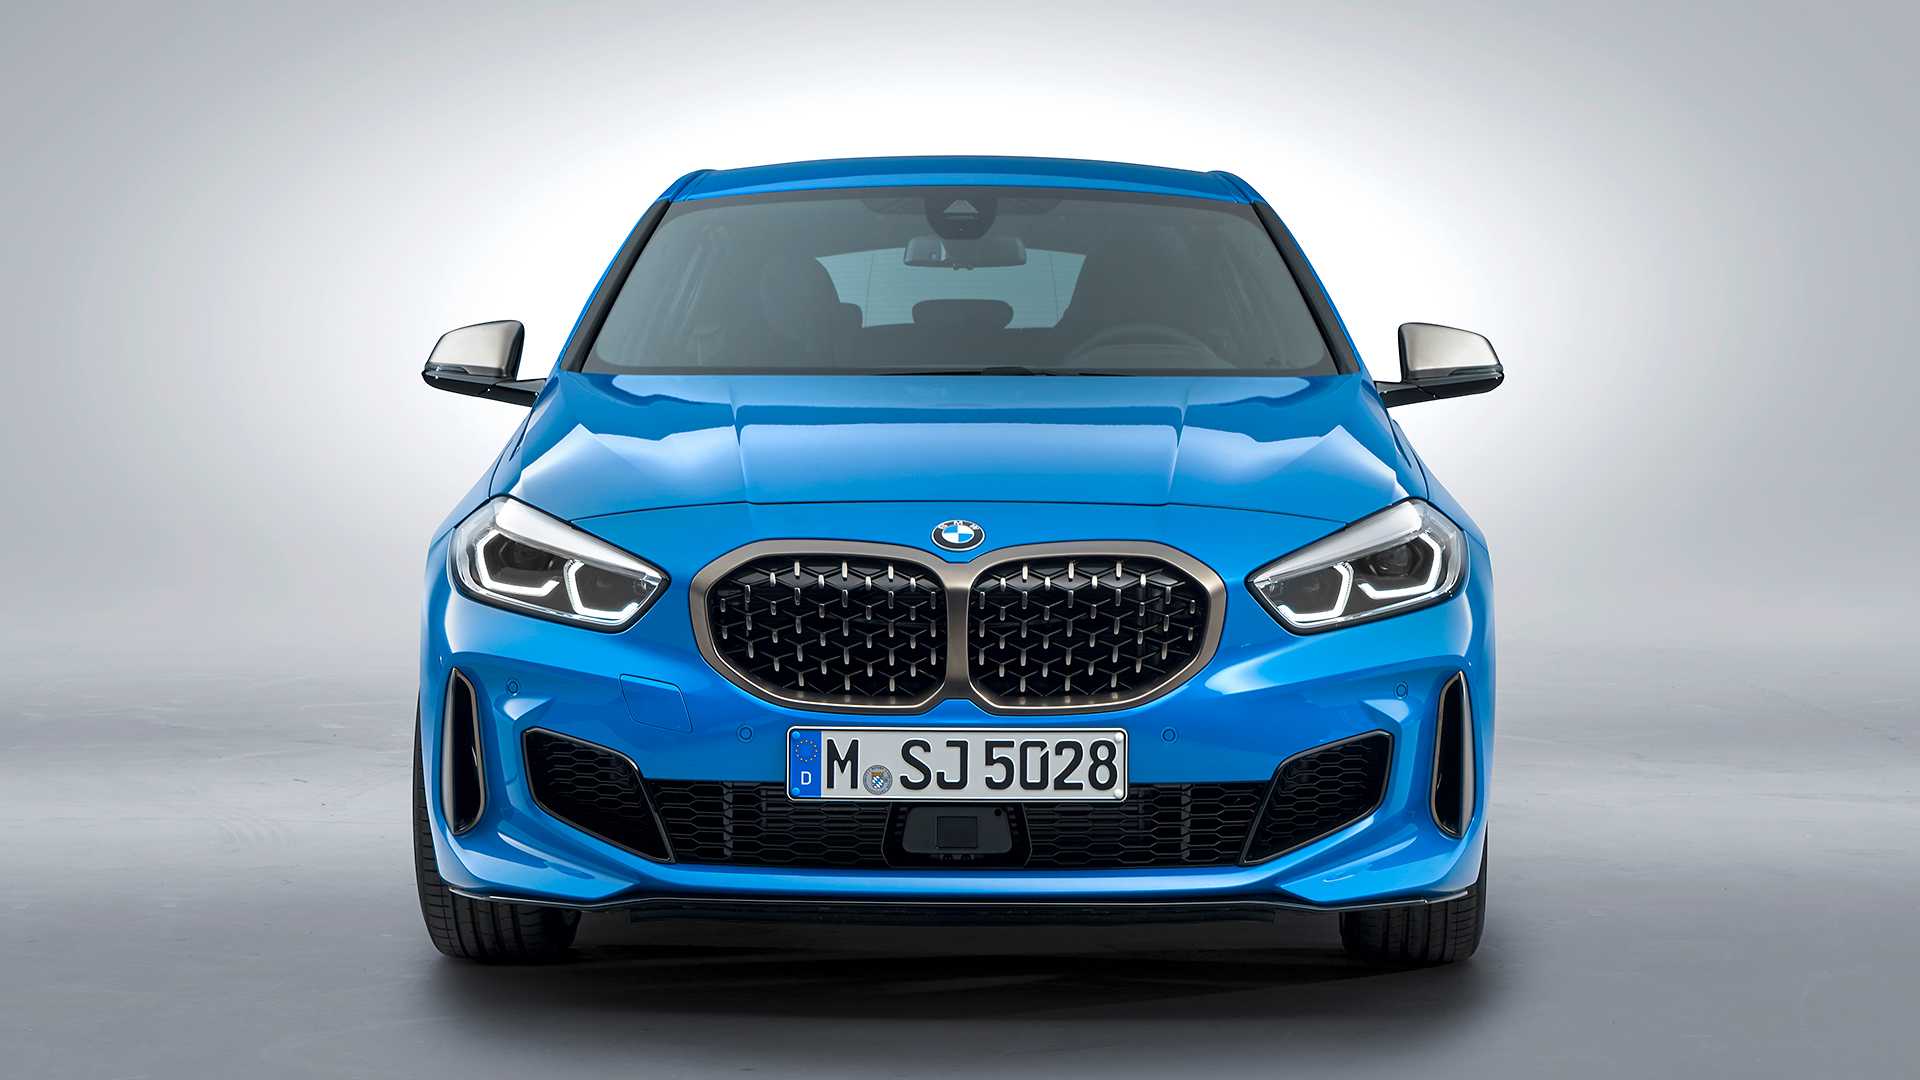 2020 BMW 1 Series Hatchback Pricing Info: It's More Expensive Than the  A-Class - autoevolution